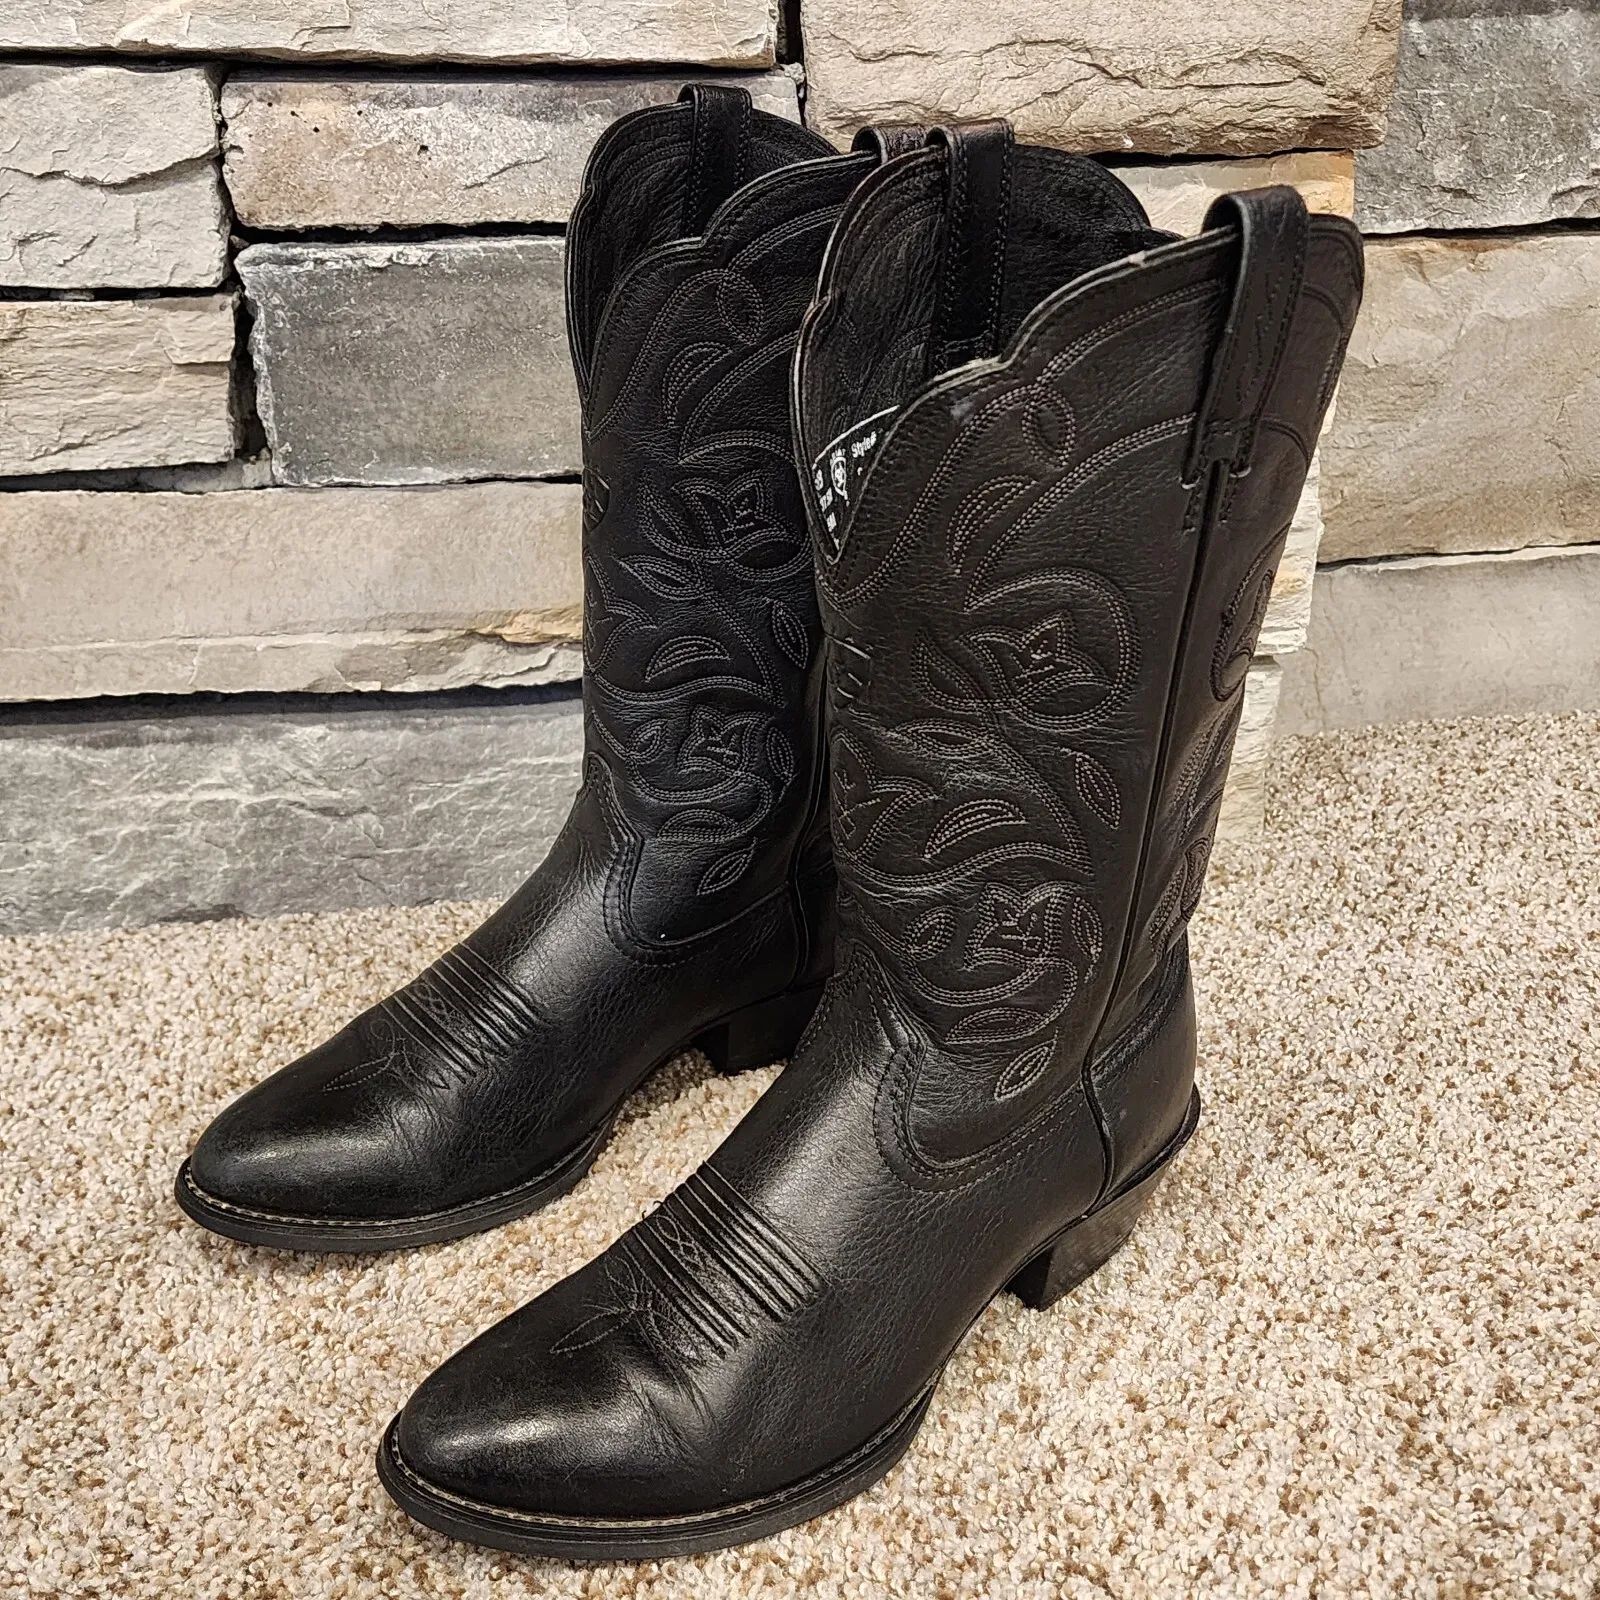 ARIAT Heritage Women’s 7 B Black Leather Pull On R Toe Western Boots 10001037 | eBay US